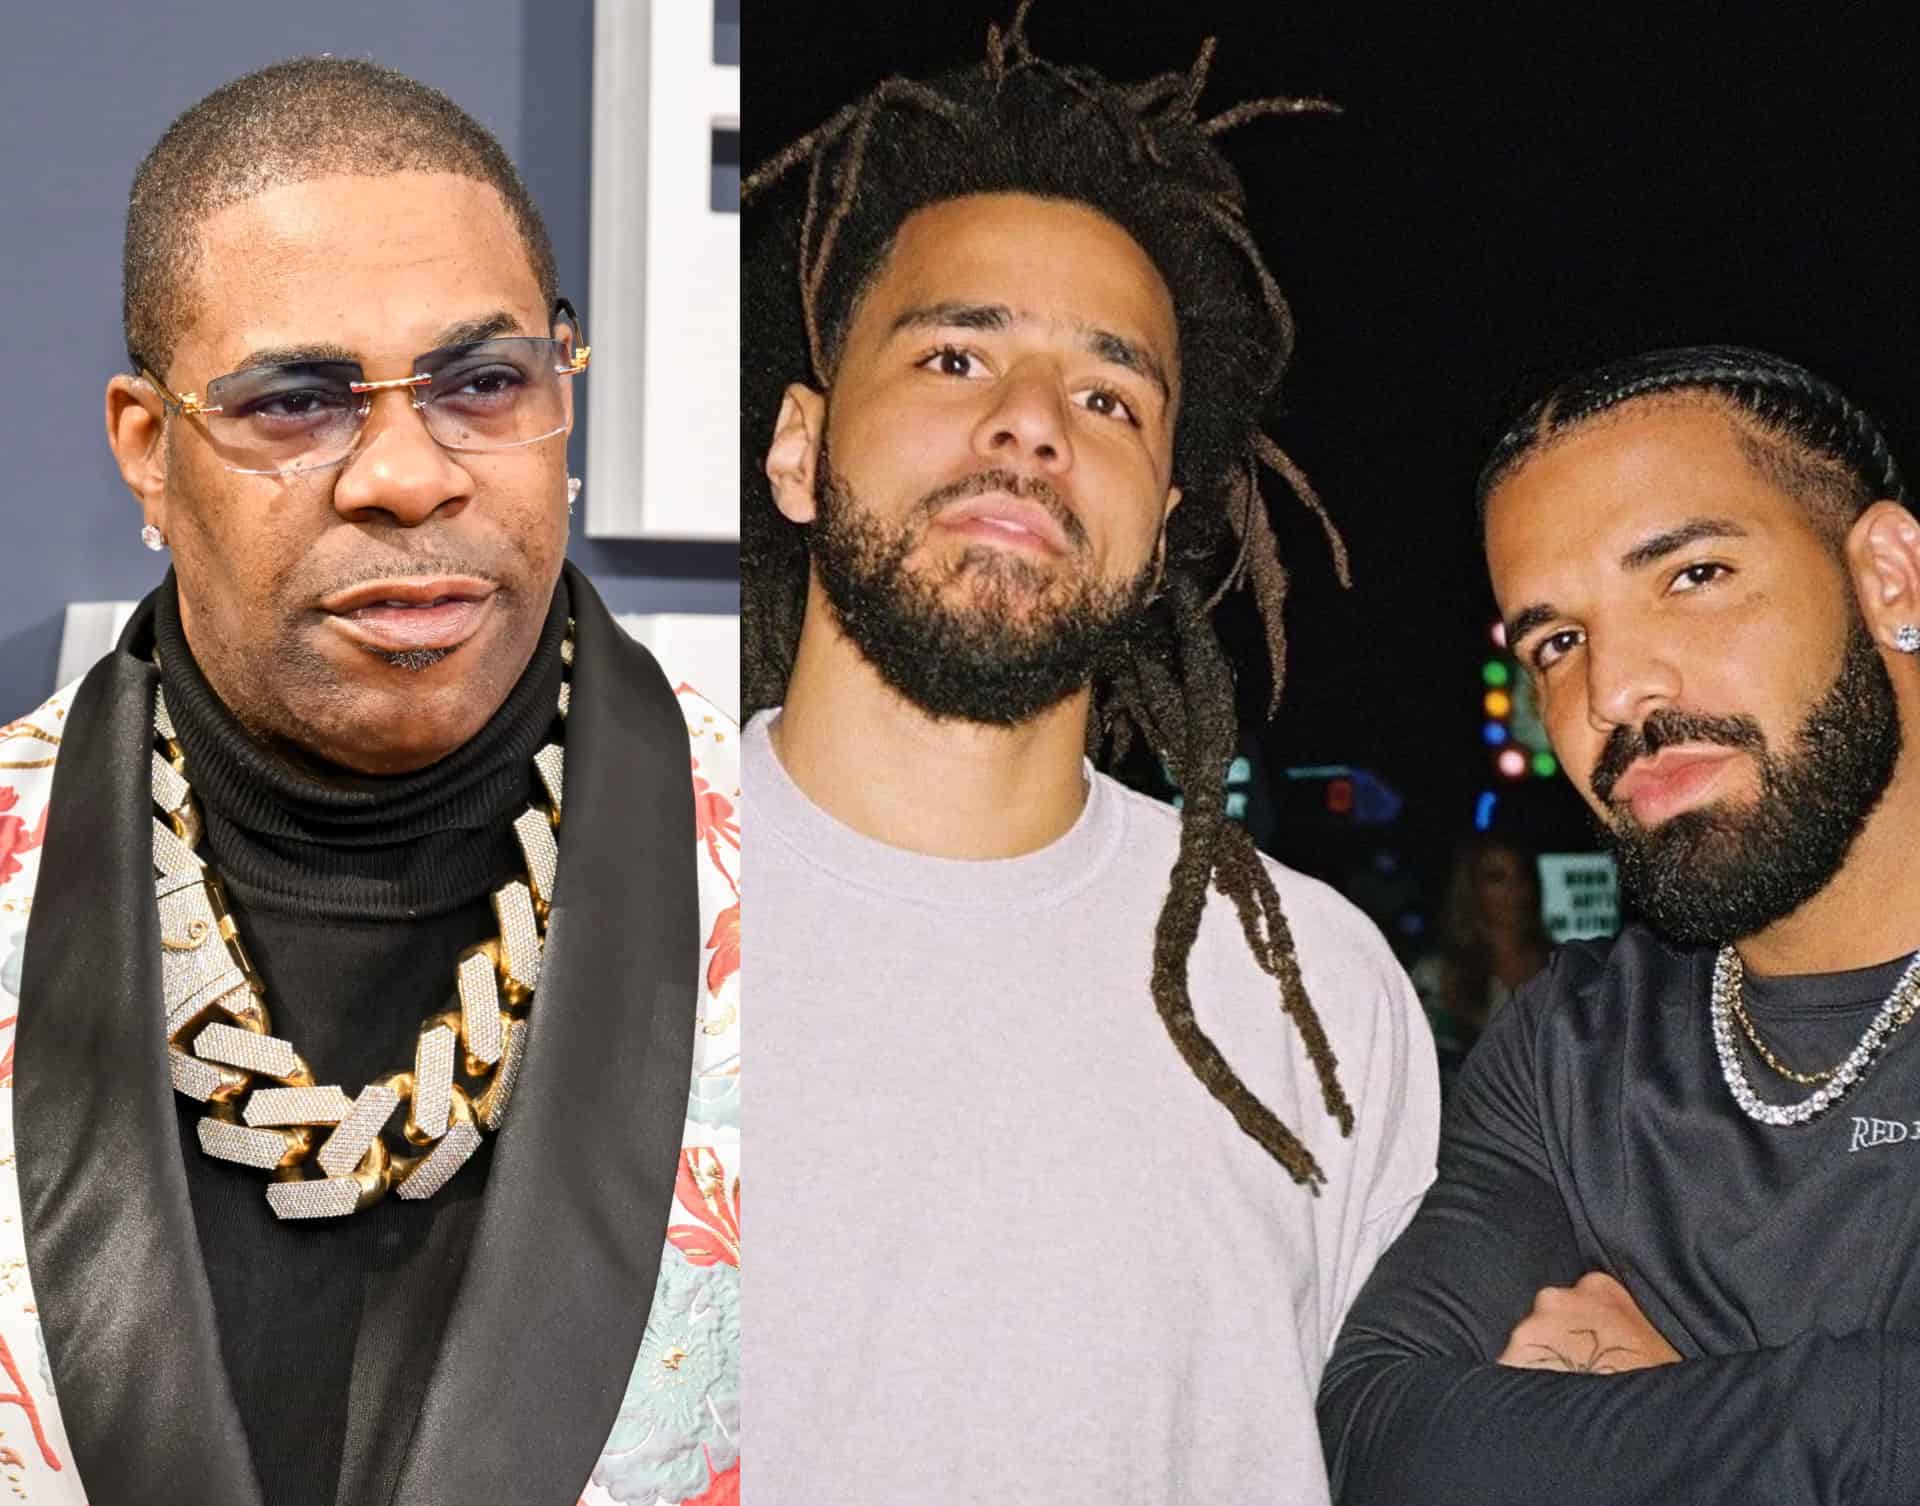 Busta Rhymes Names J. Cole, Drake & More In His Dream Collaborators